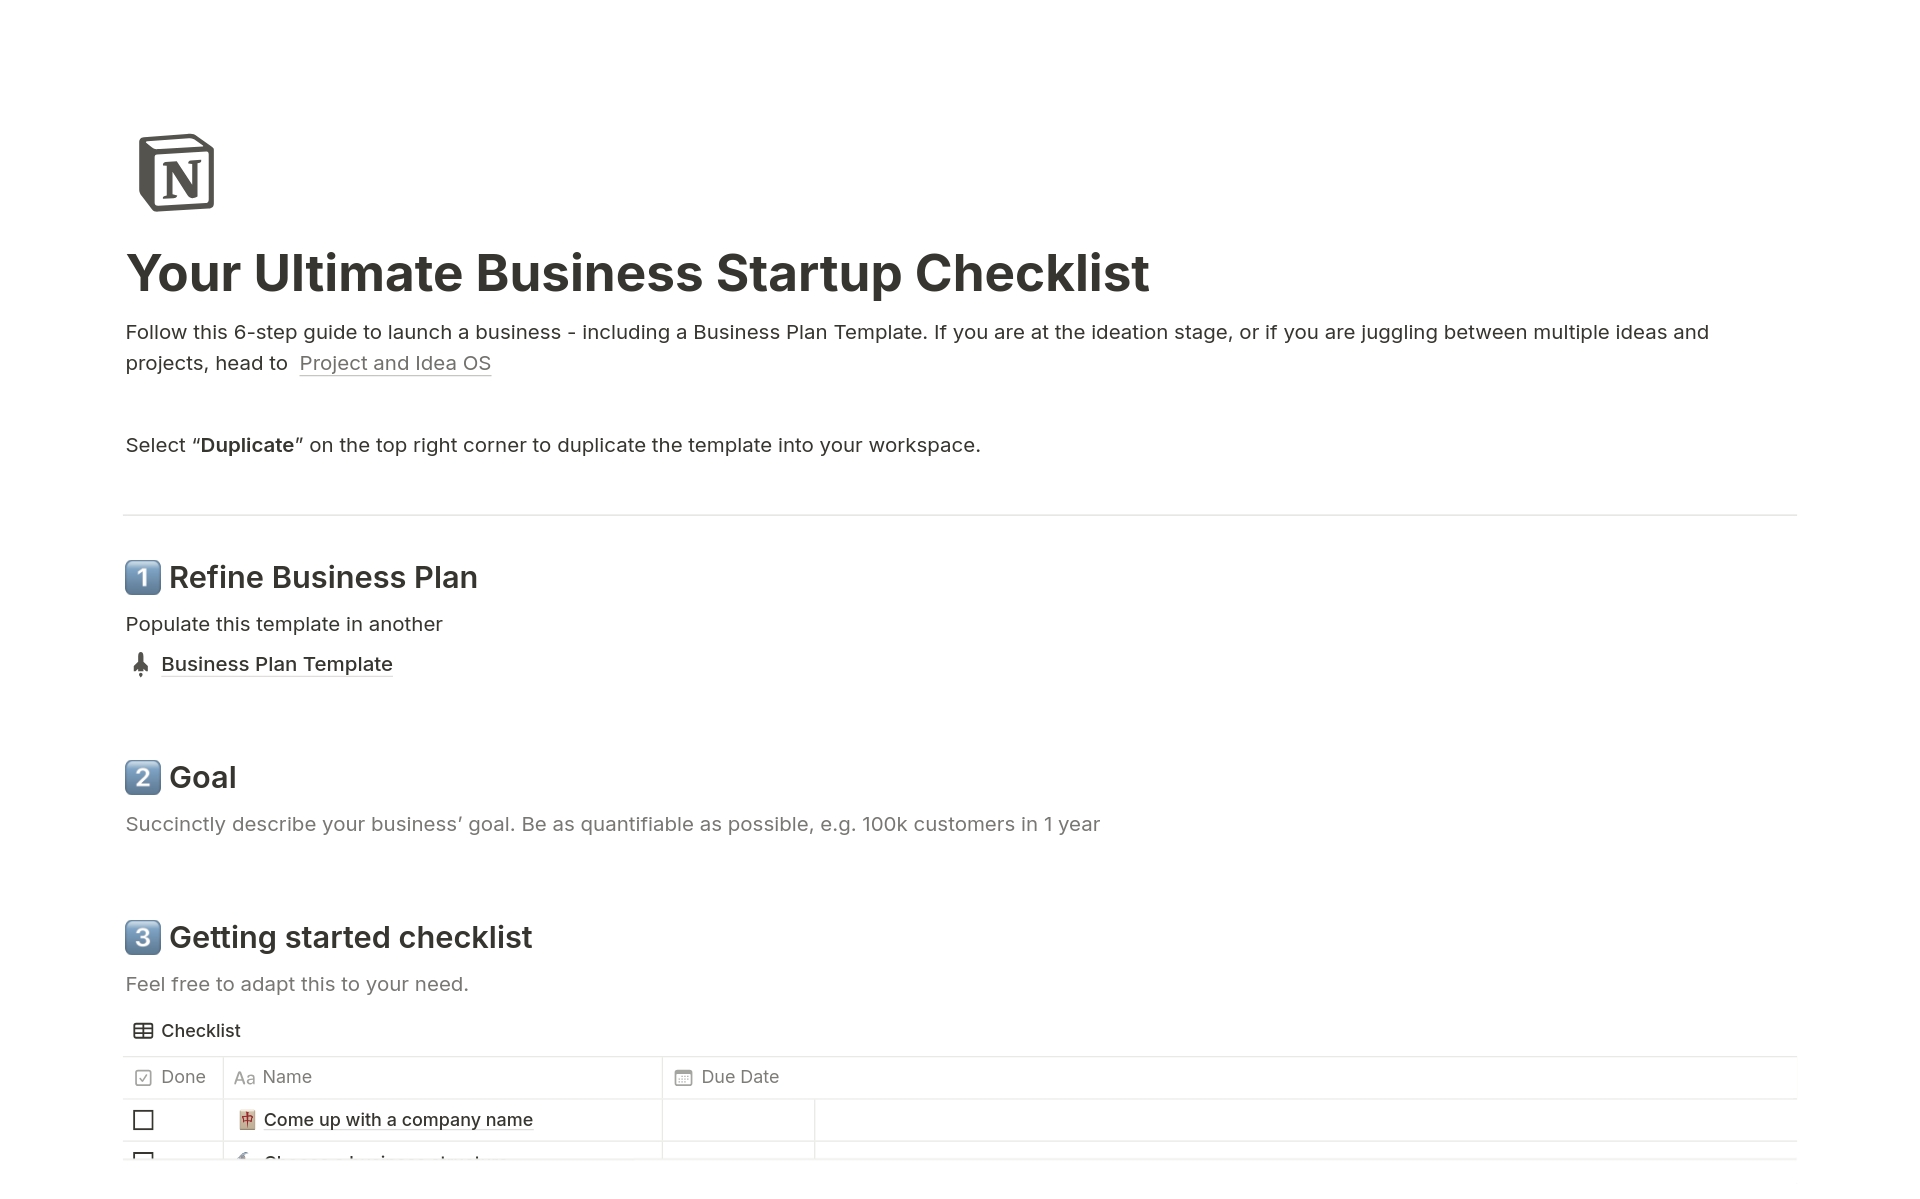 Your Ultimate Business Startup Checklistのテンプレートのプレビュー